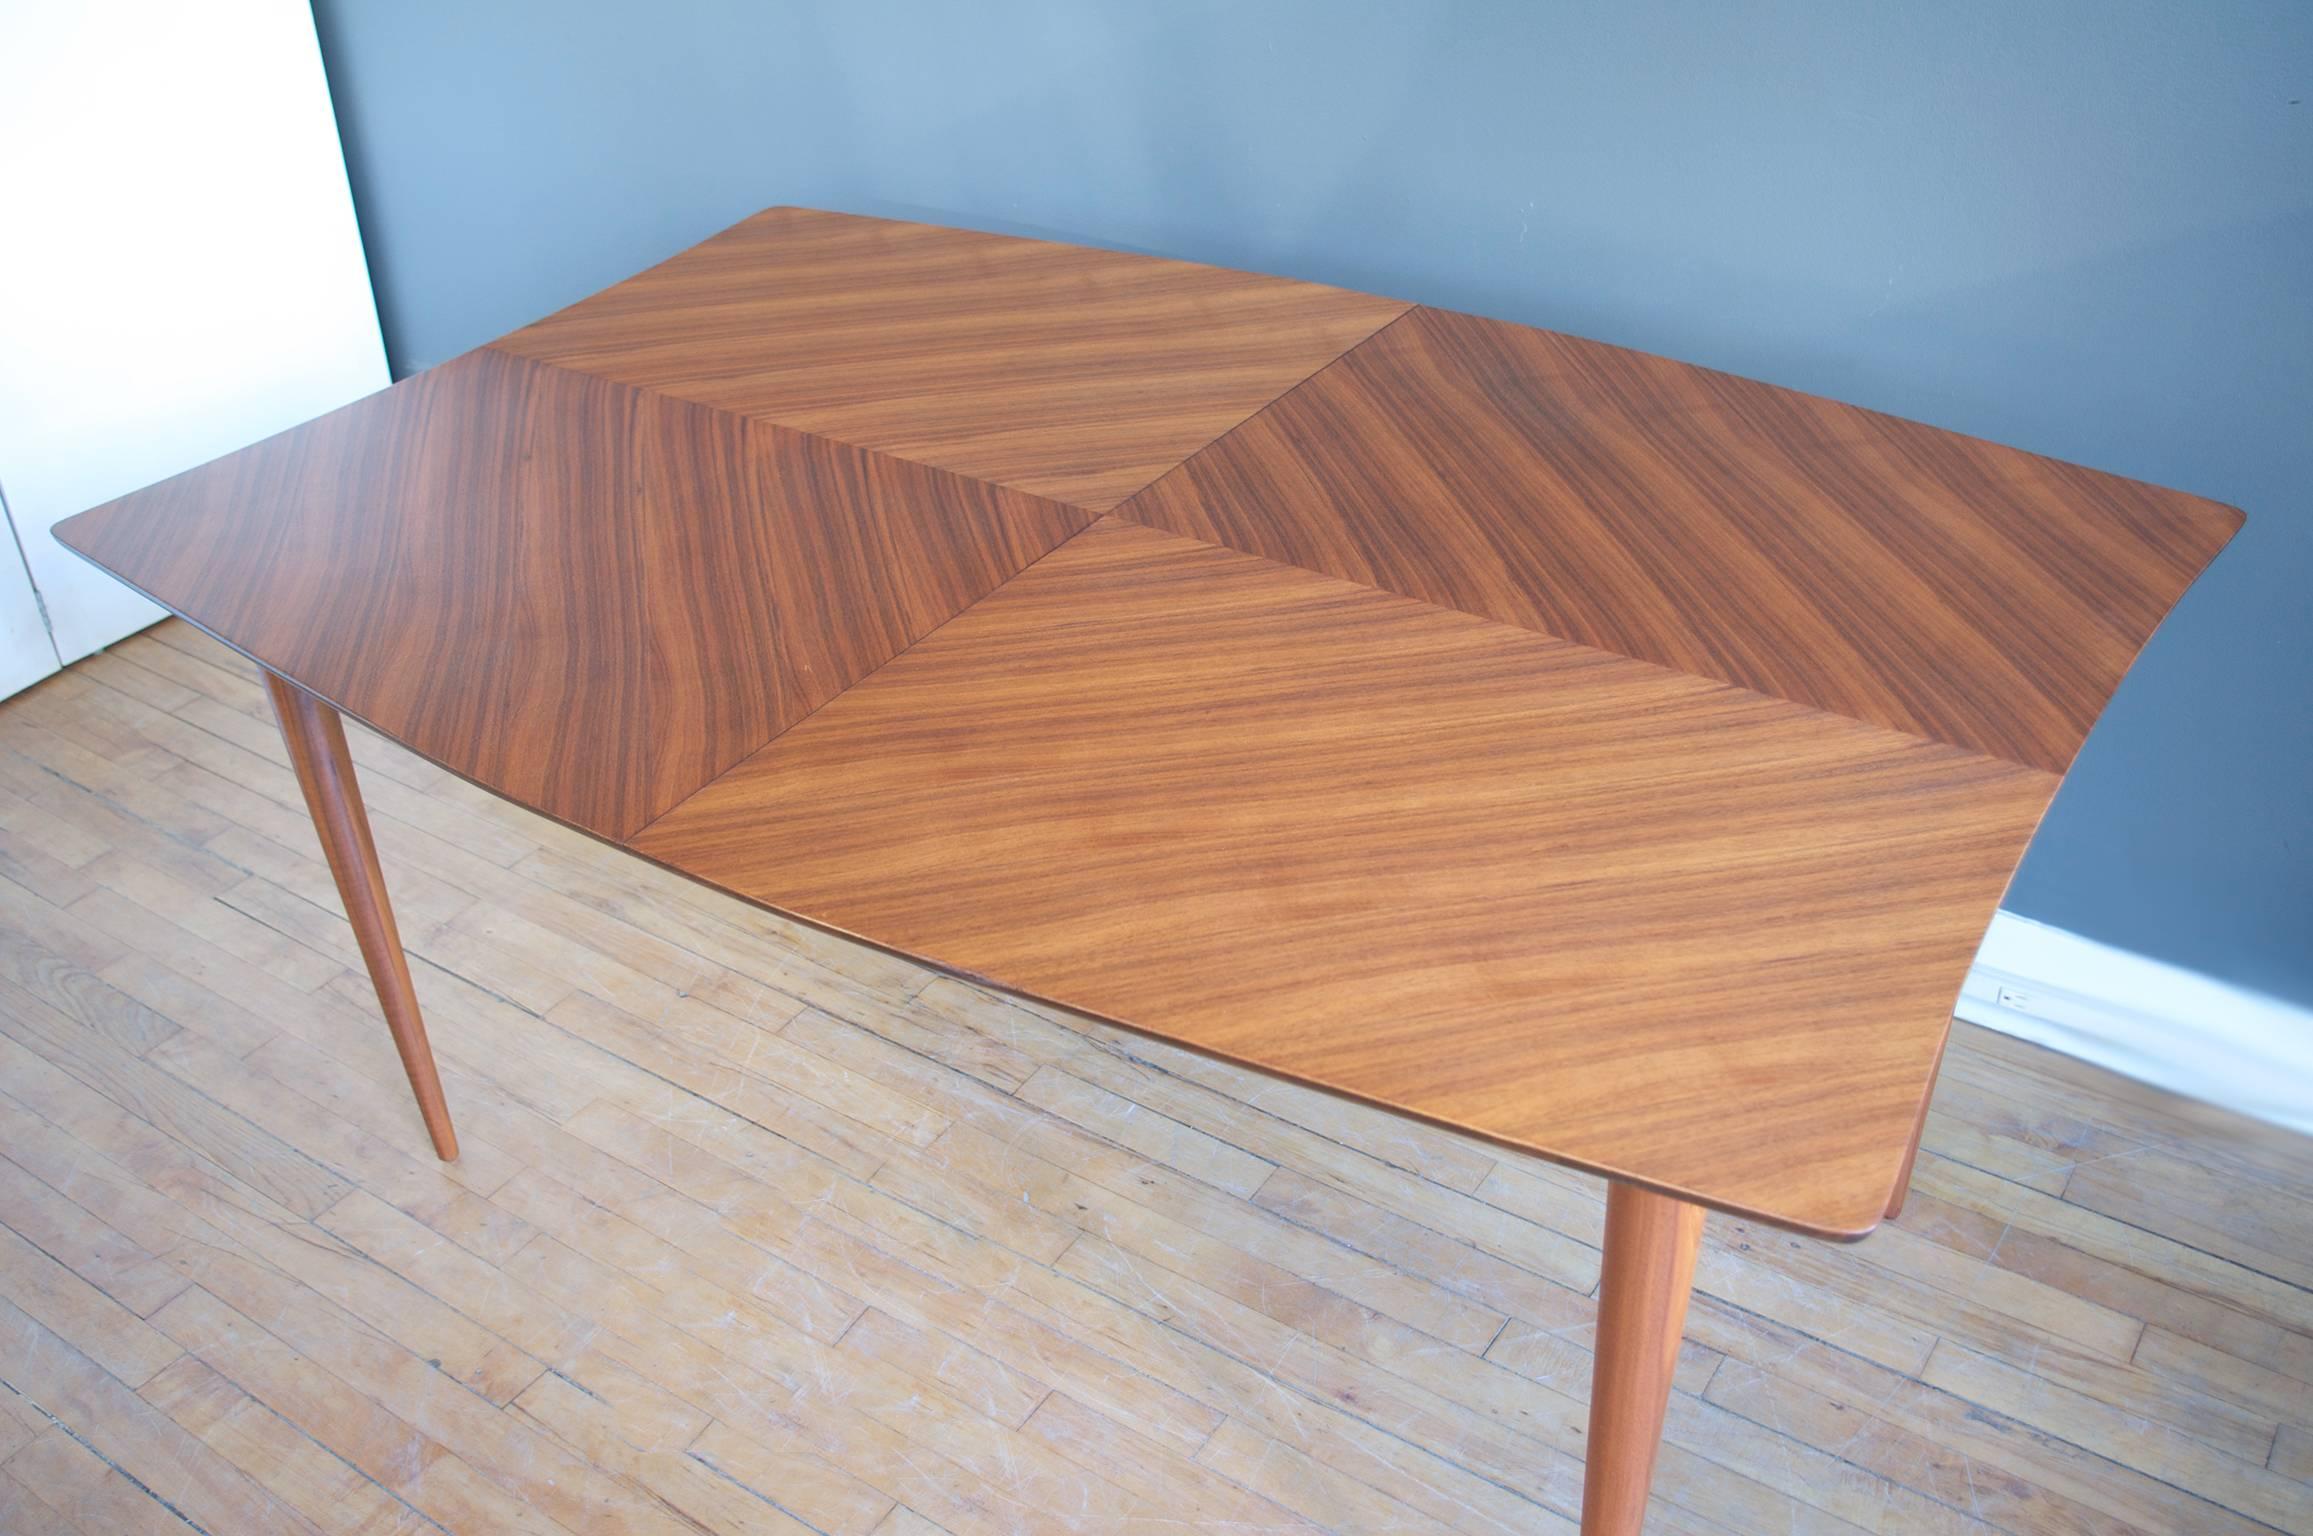 An expandable bleached mahogany dining table designed by Paul Laszlo and manufactured by Brown Saltman of California, circa 1950. Featuring a finely matched top with dramatic graining. Interesting two-tone effect created when leaves are added.